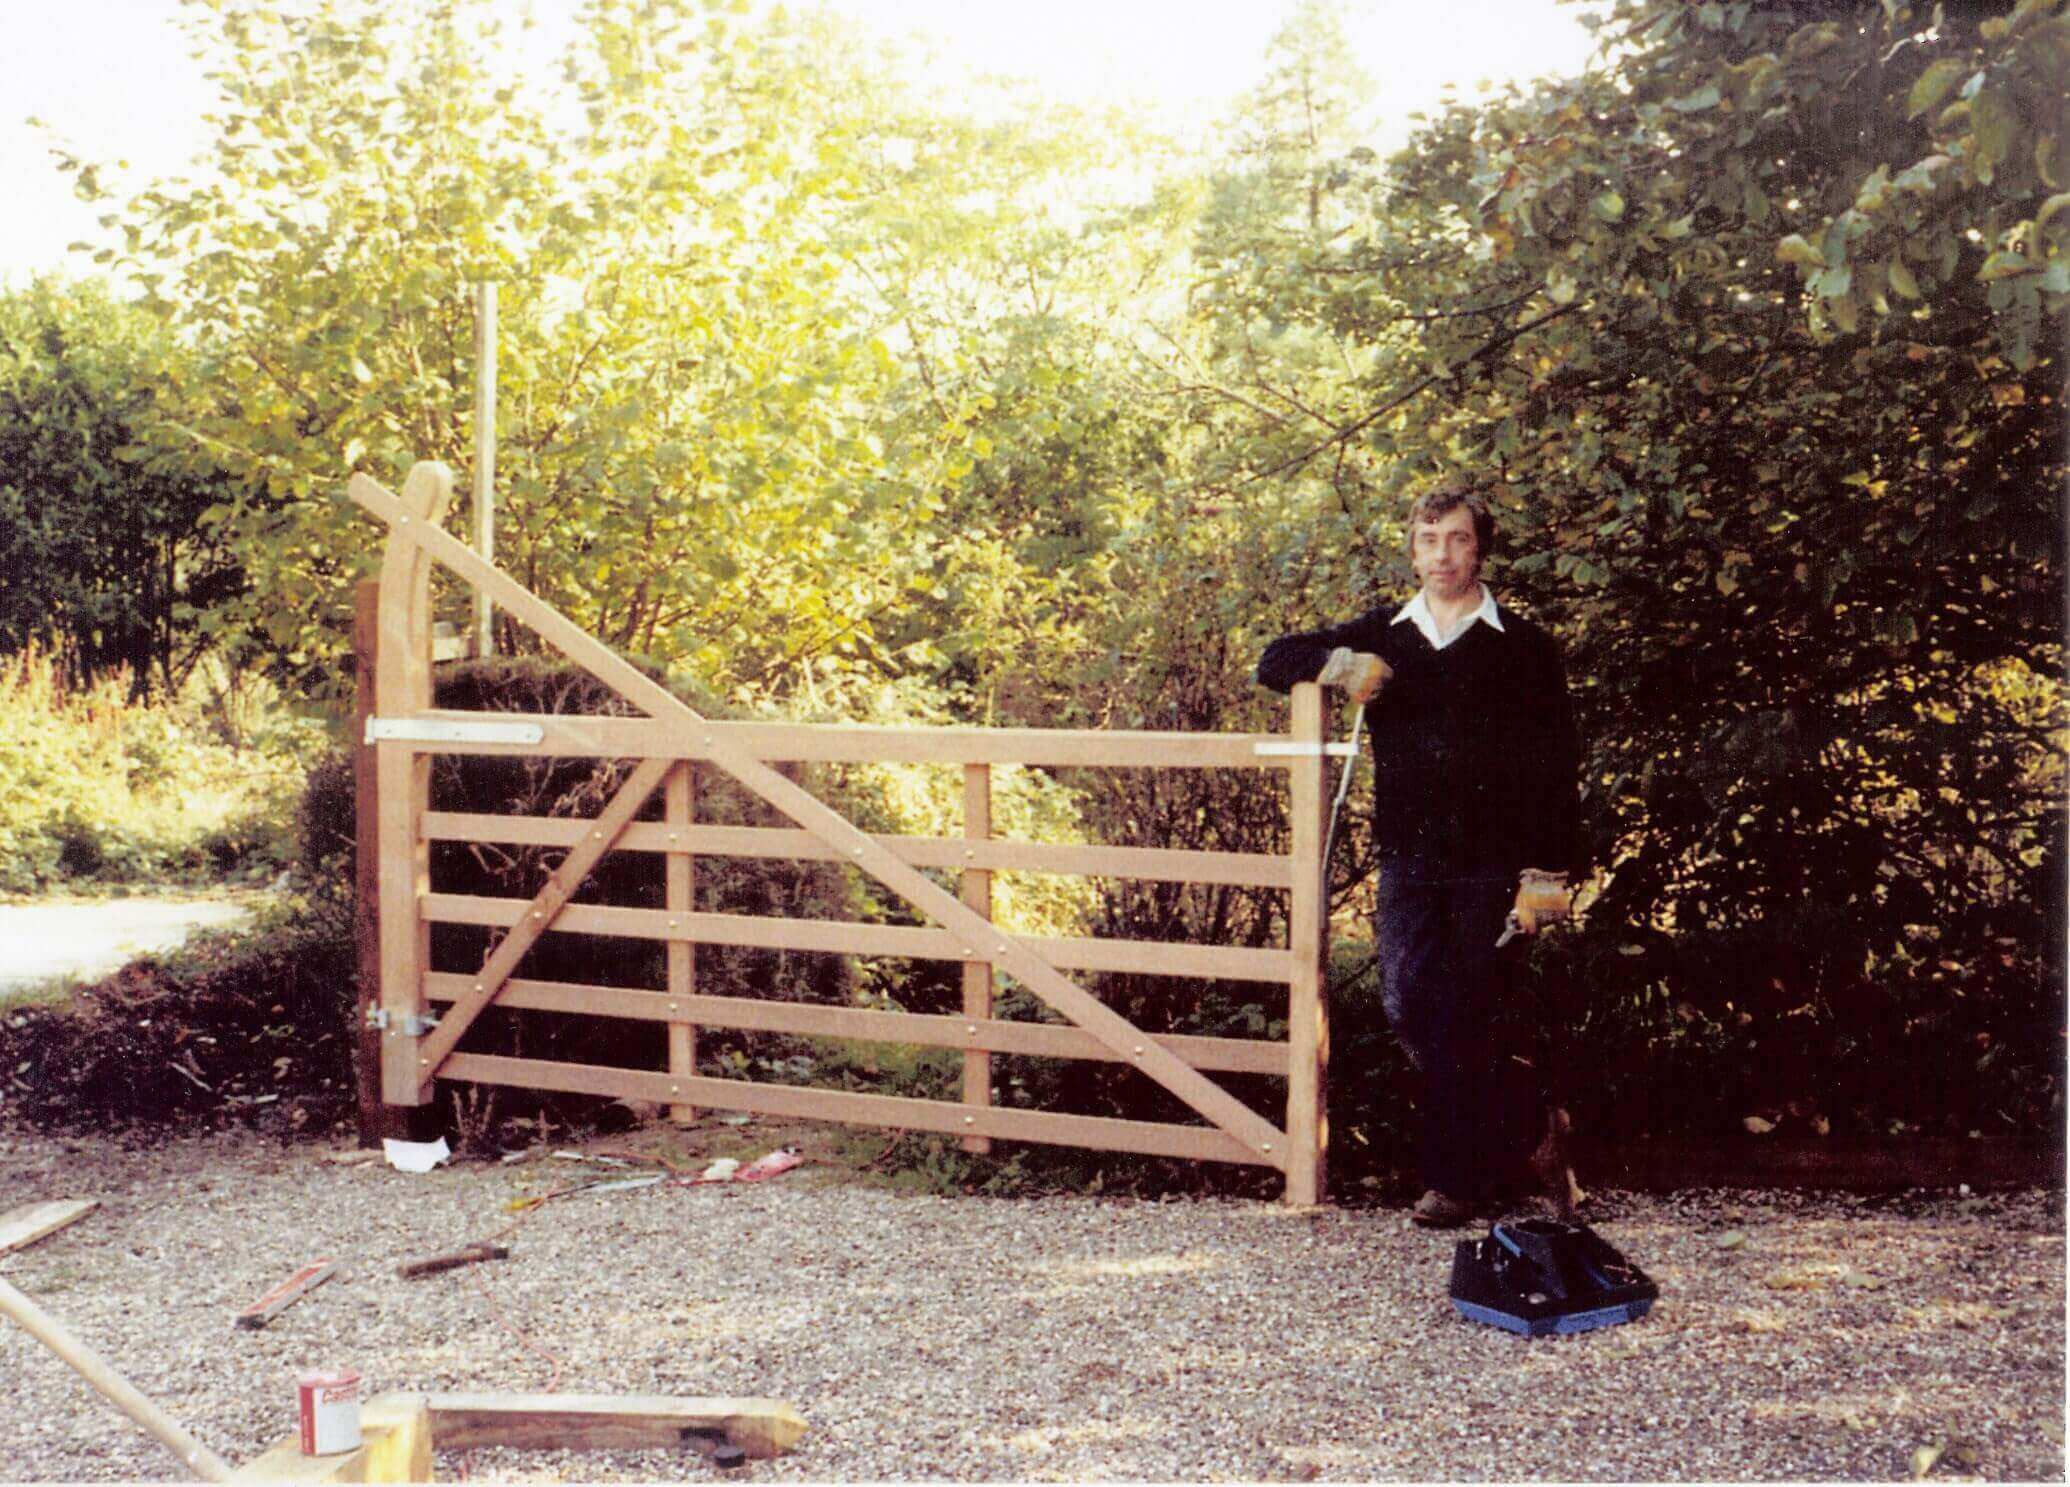 richard and old Jacksons entrance gate in 1982